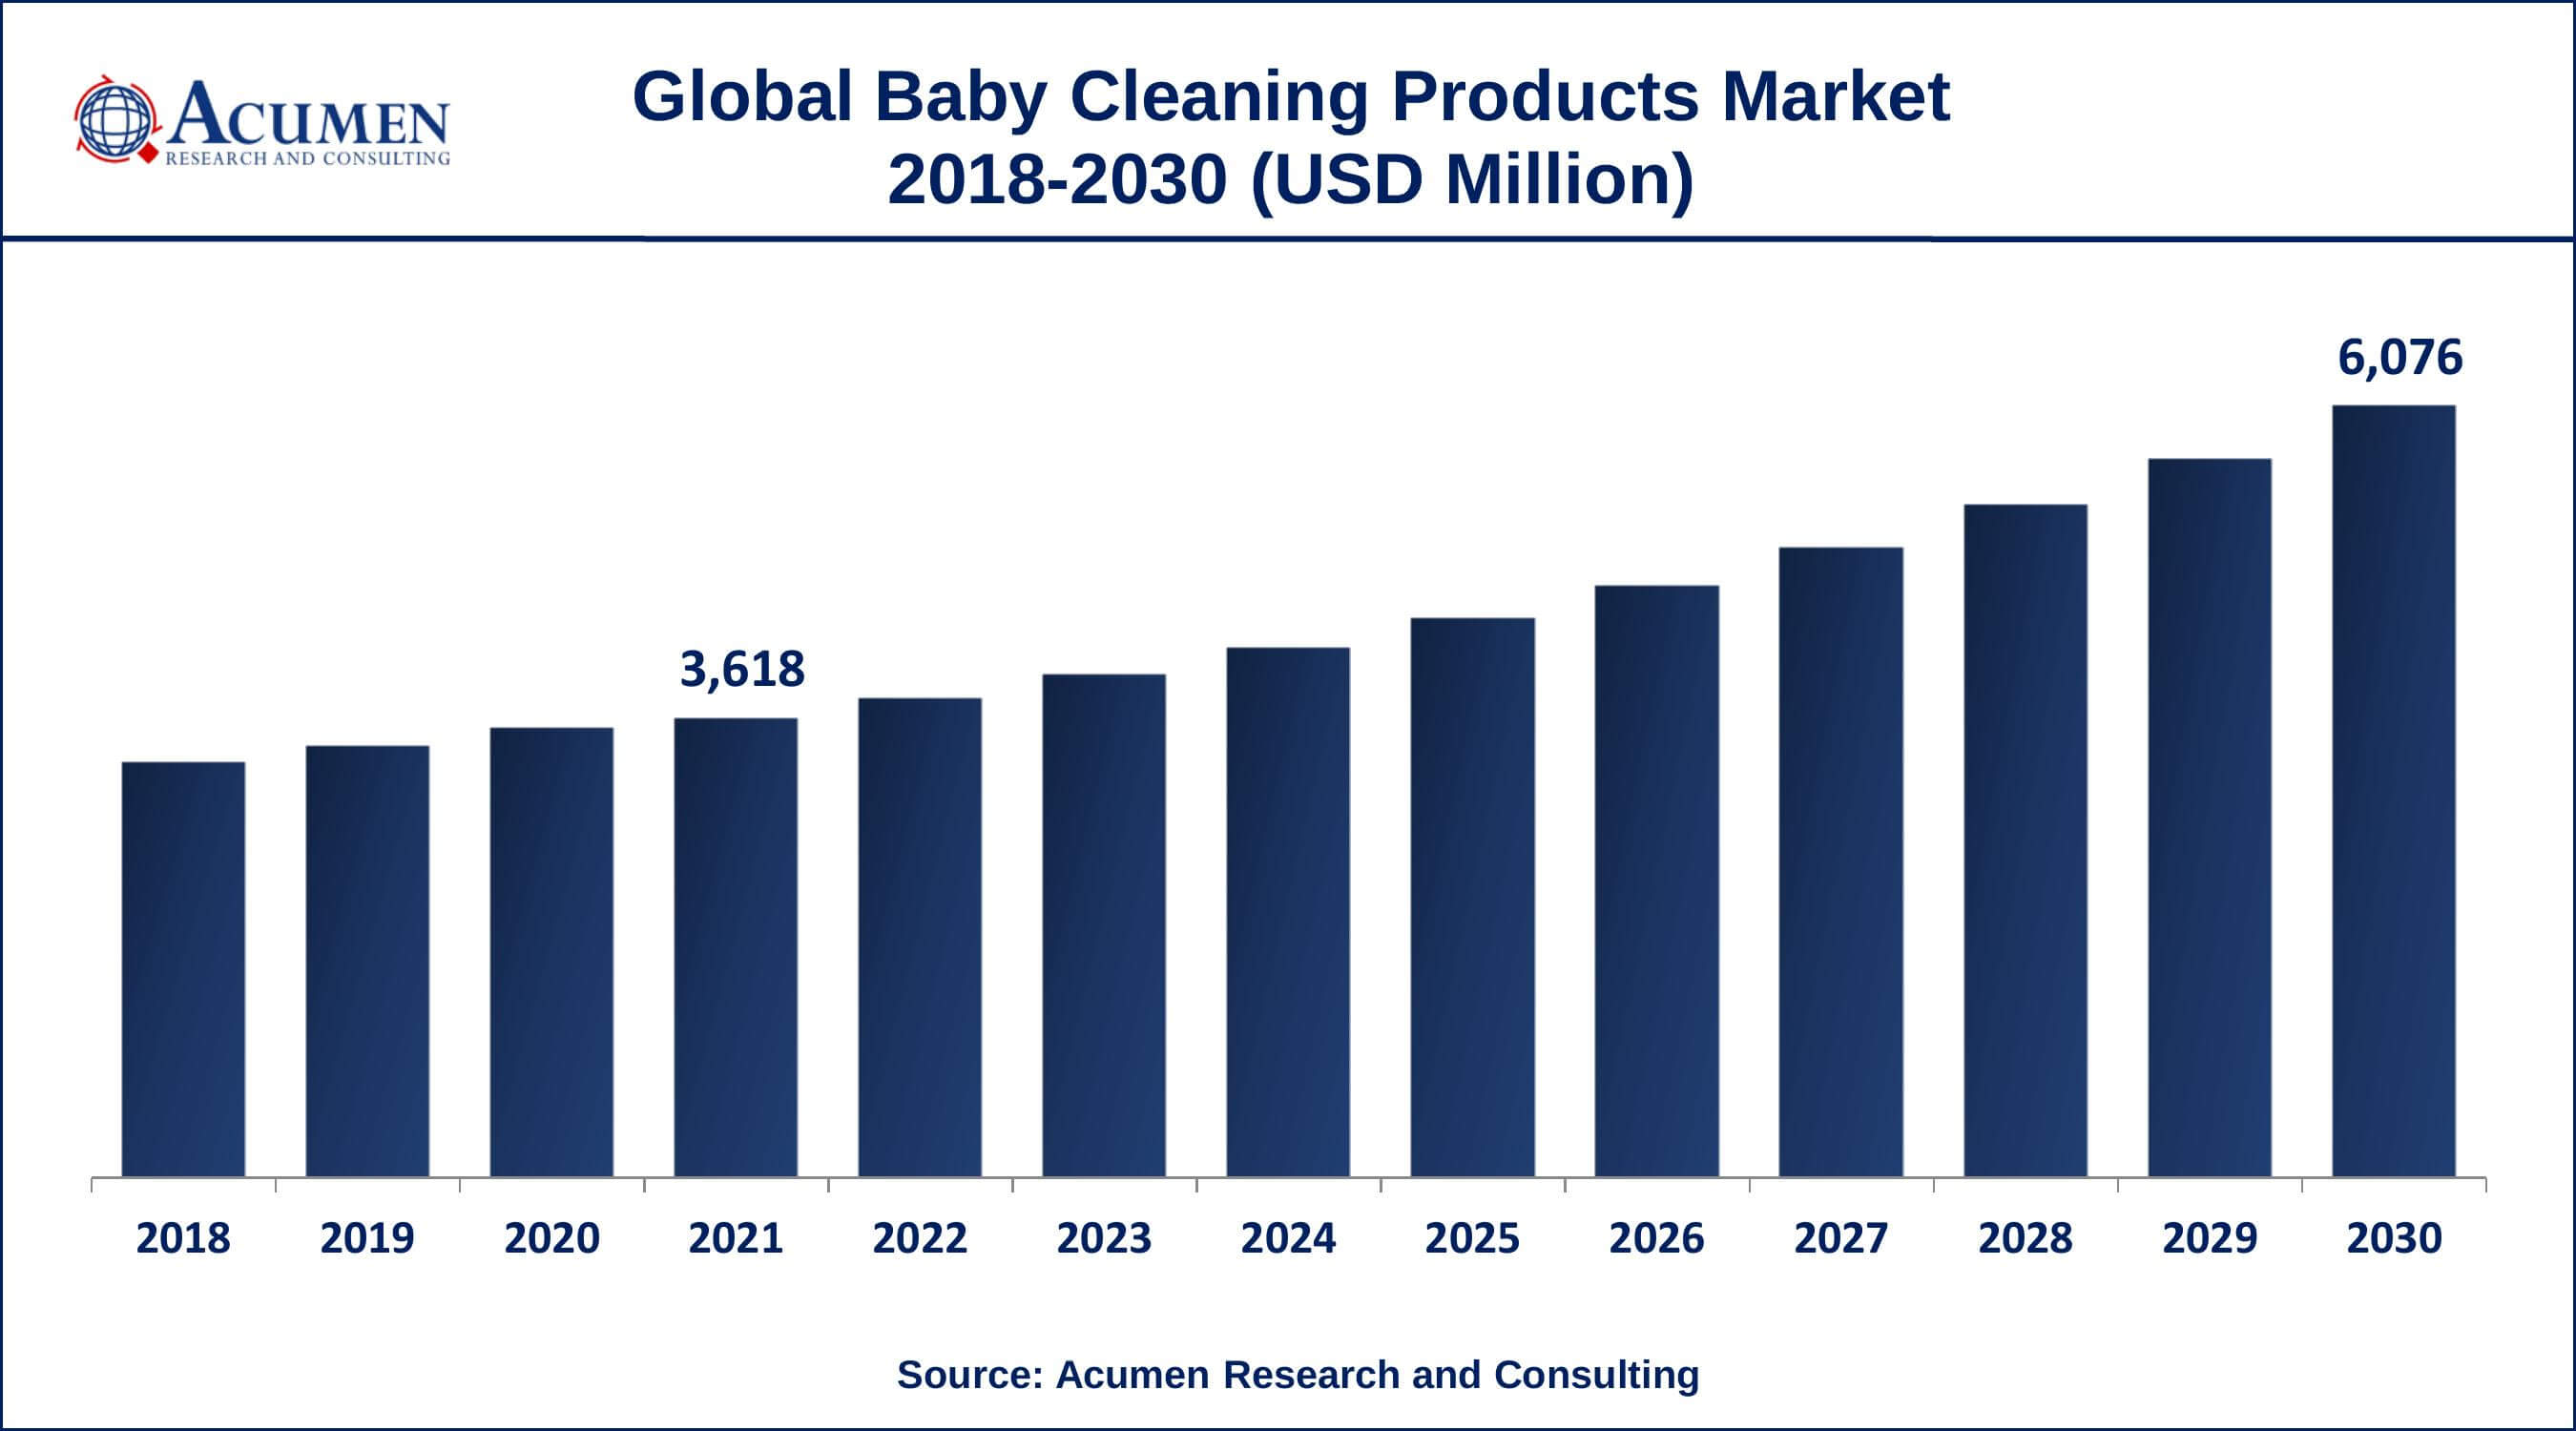 Asia-Pacific baby cleaning products market growth will observe fastest CAGR from 2022 to 2030